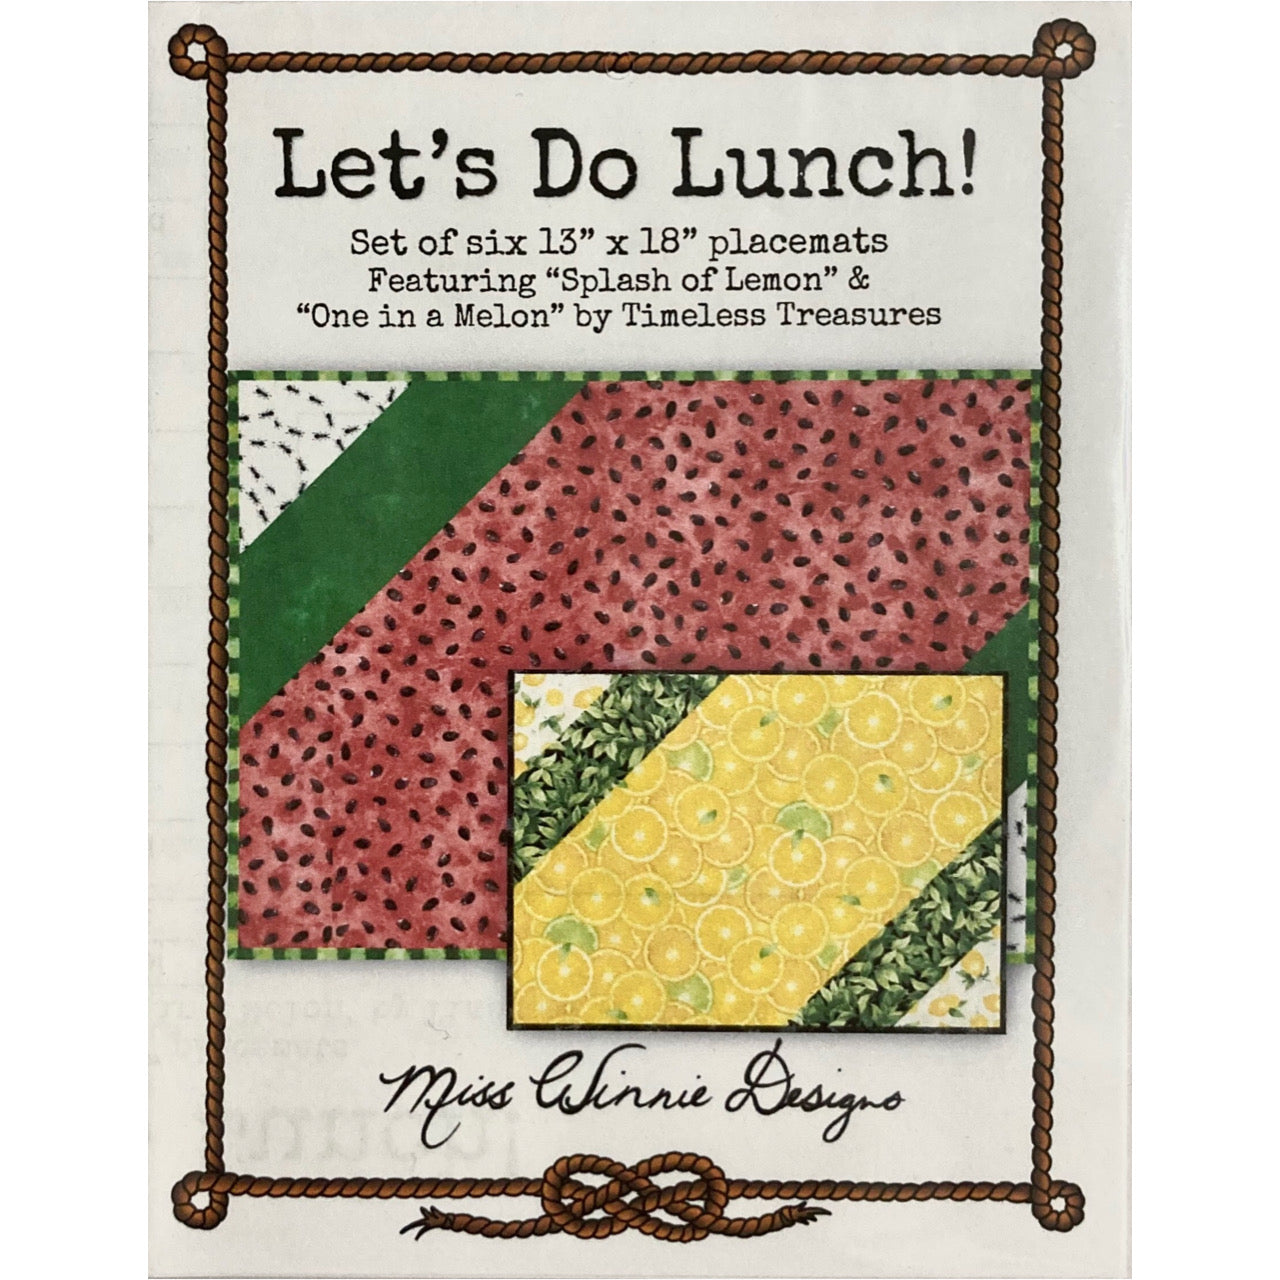 Placemat Pattern - Let’s Do Lunch